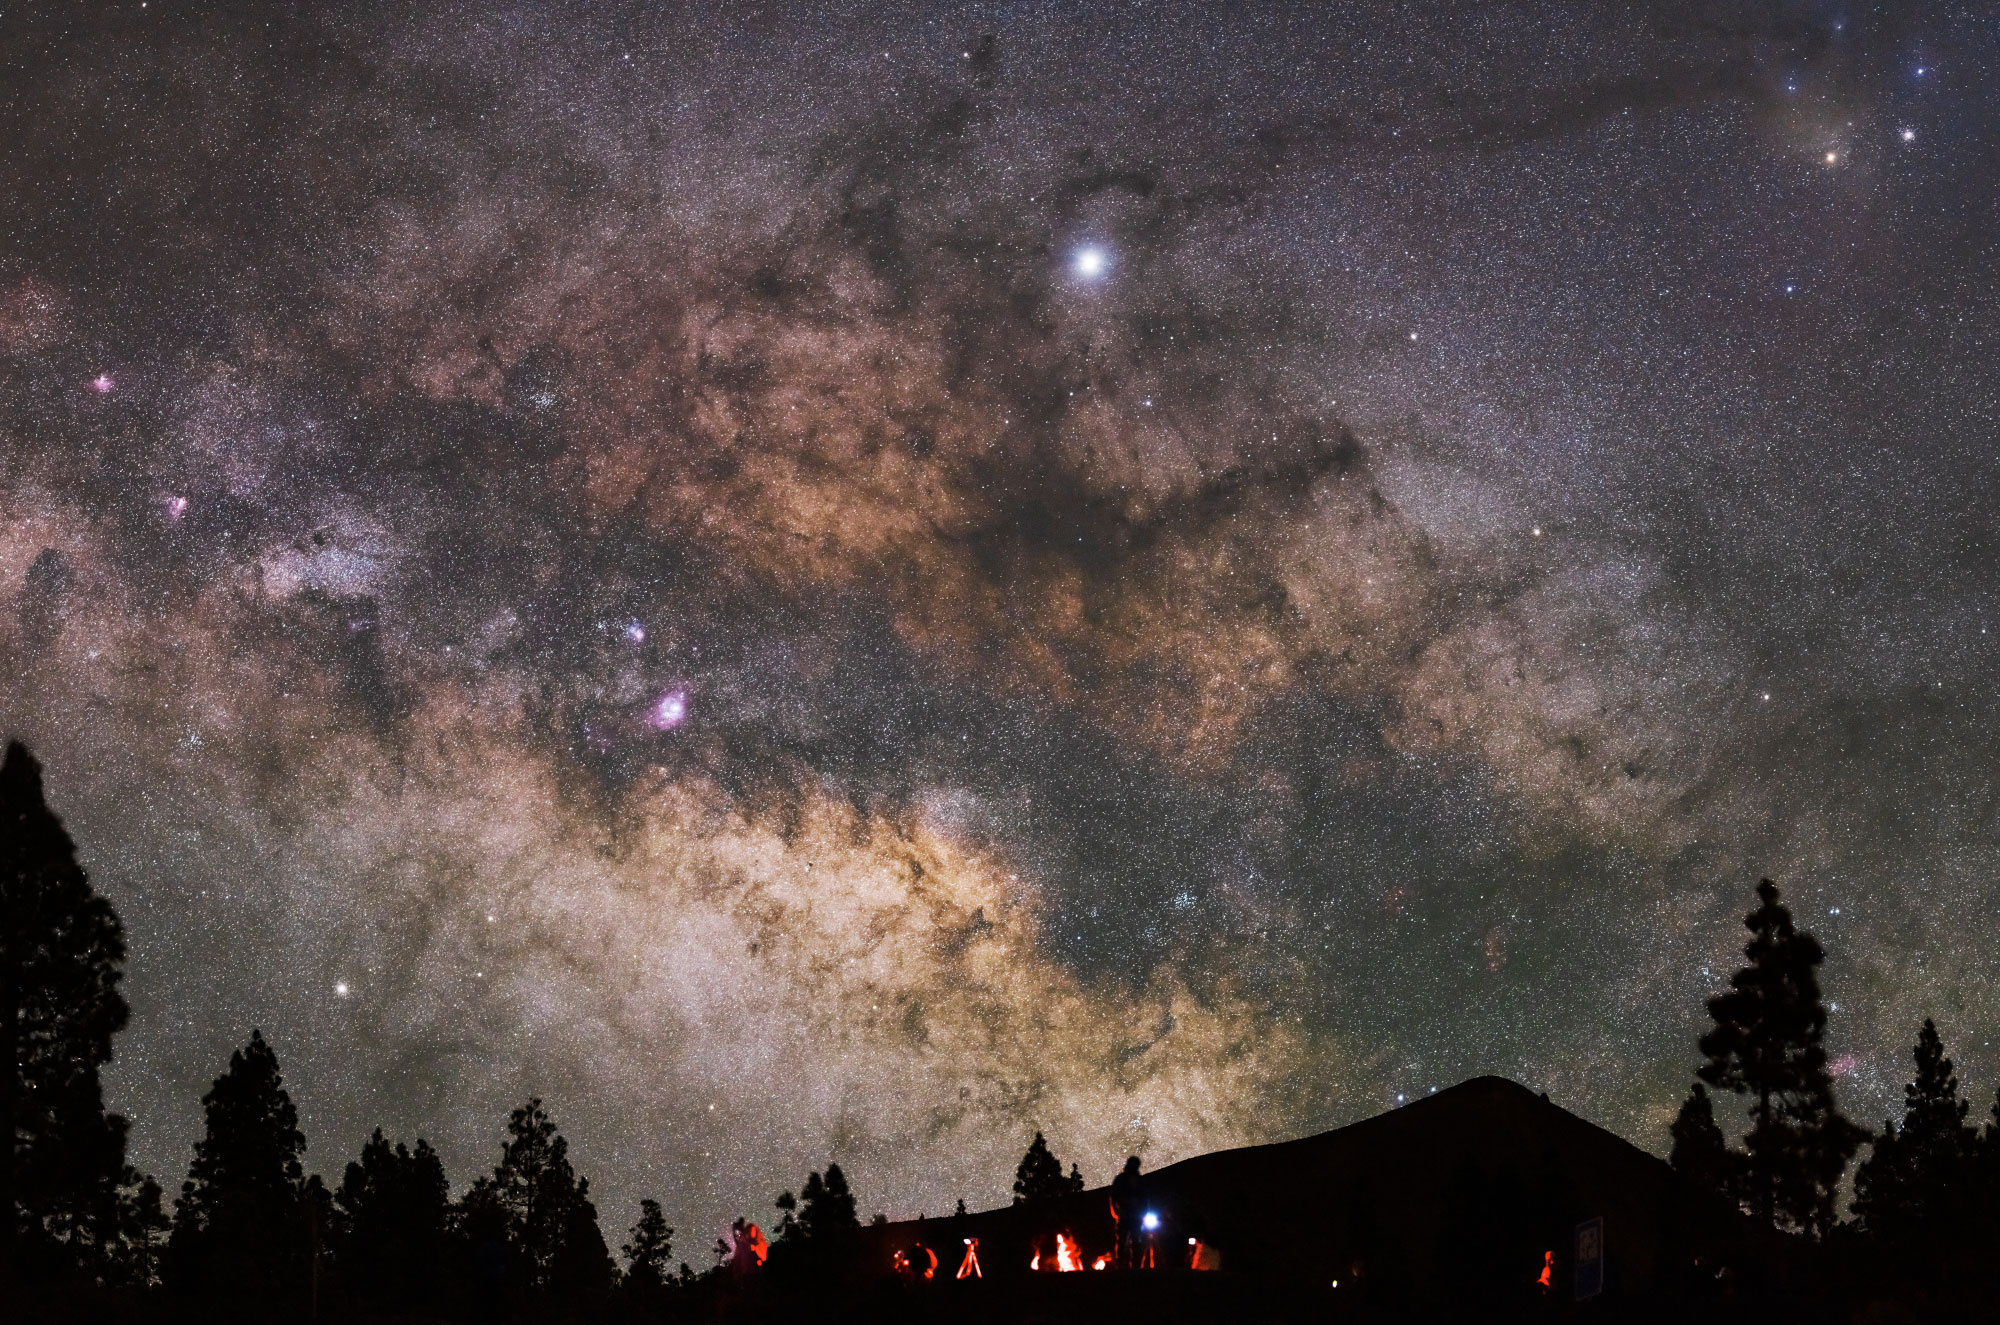 Night sky illuminated by bright stars and other celestial objects